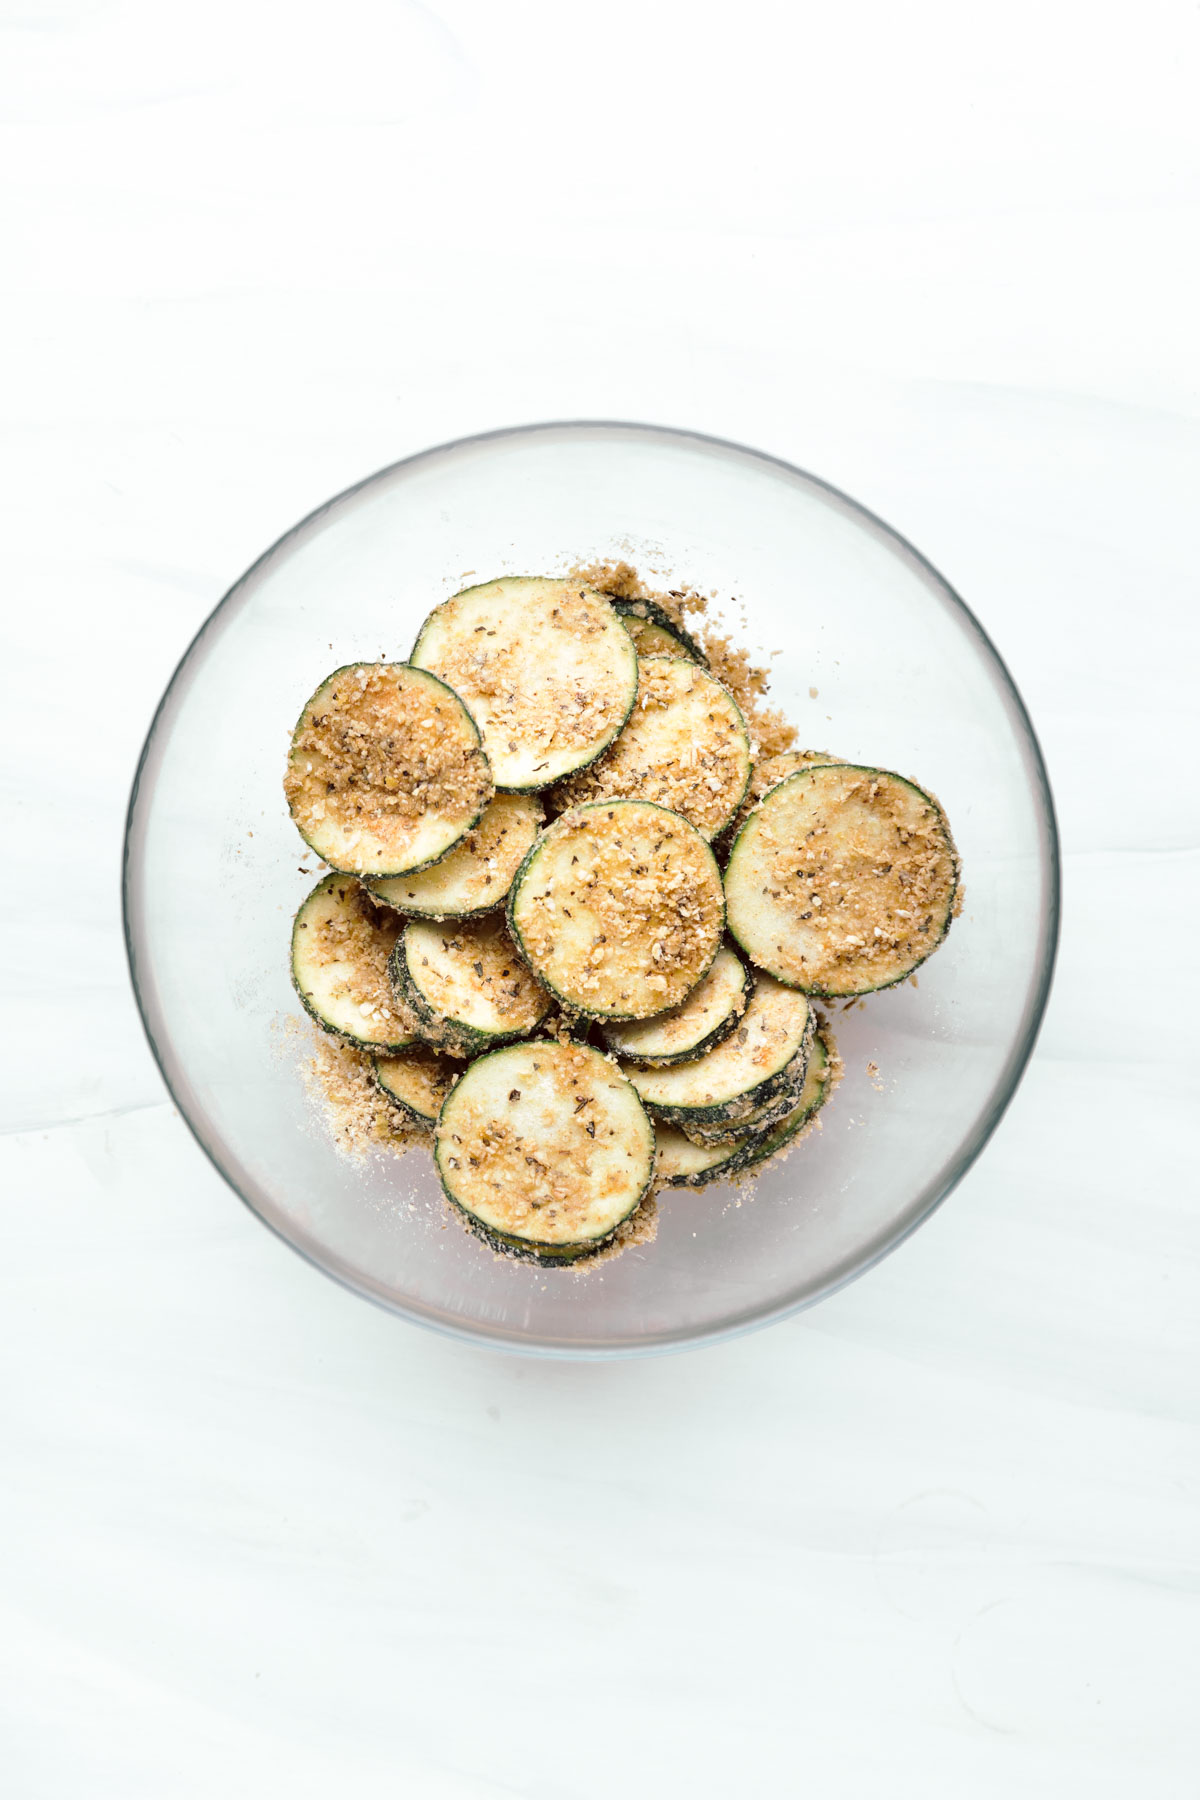 Brown coated zucchini slices in a glass bowl on a white backdrop